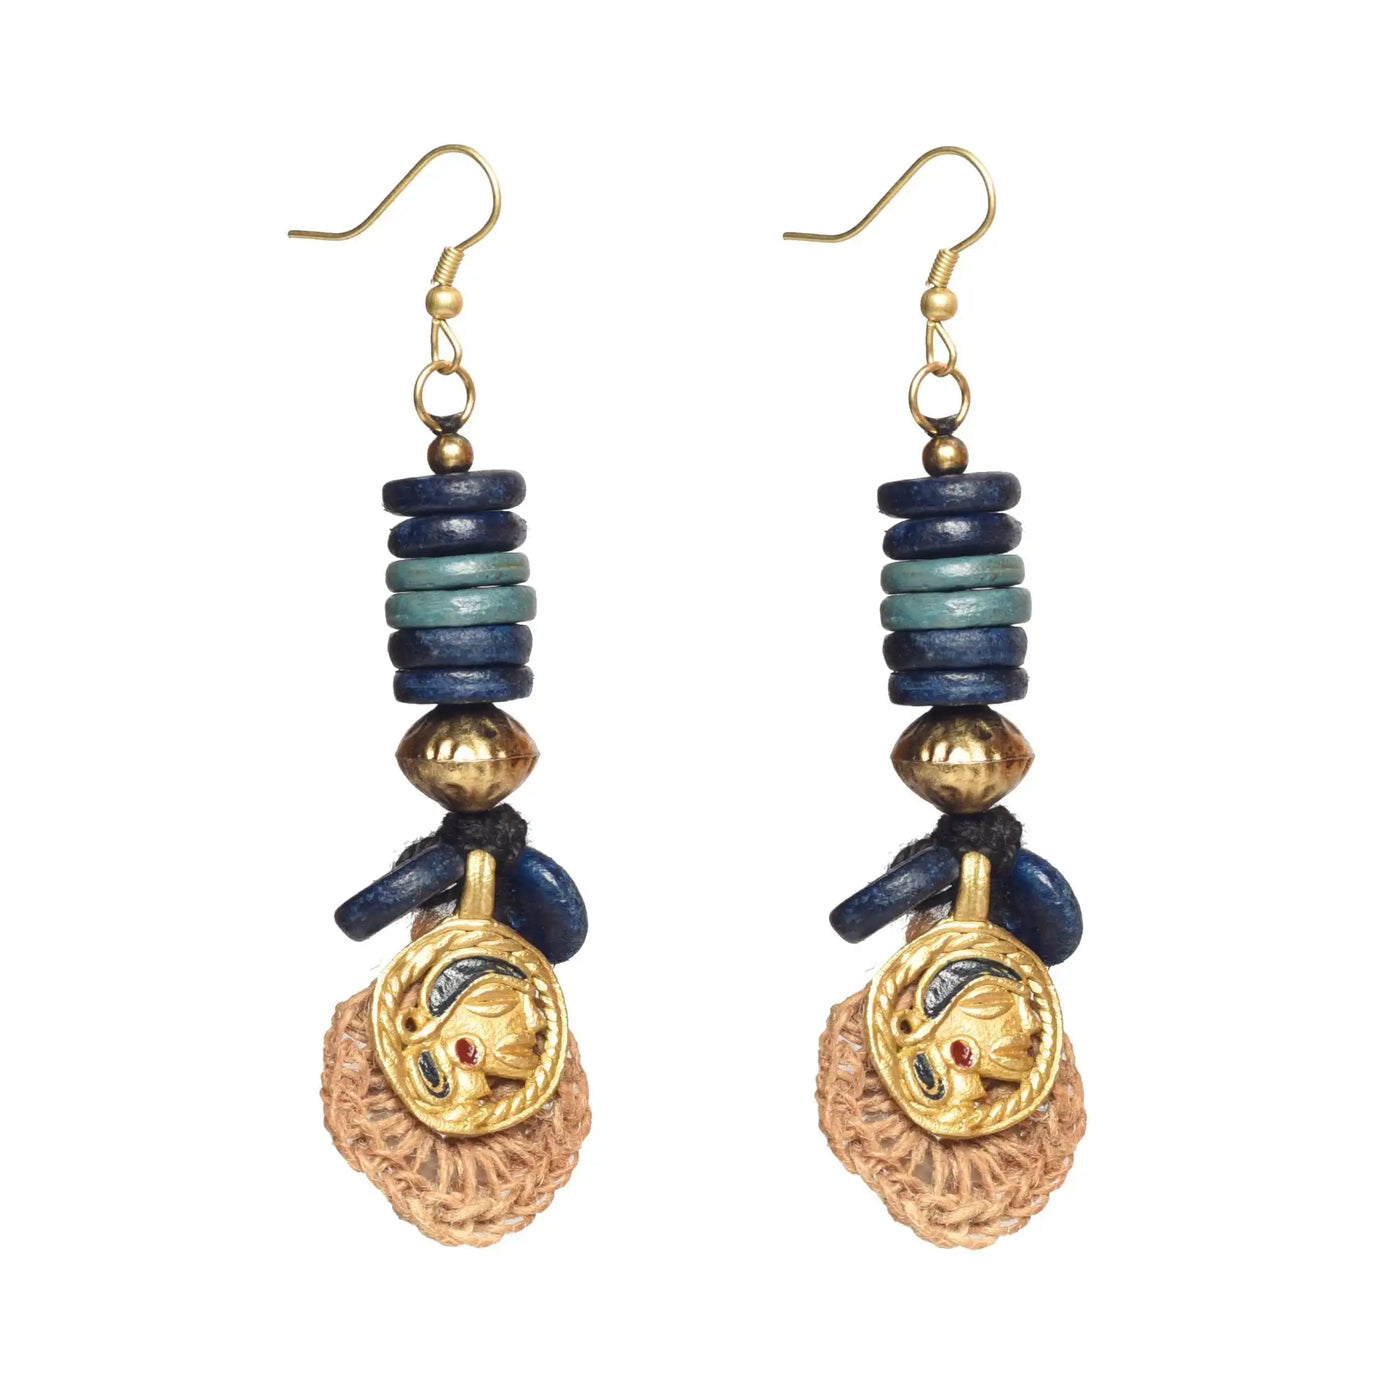 The Queens Loop Handcrafted Earrings - Fashion & Lifestyle - 4